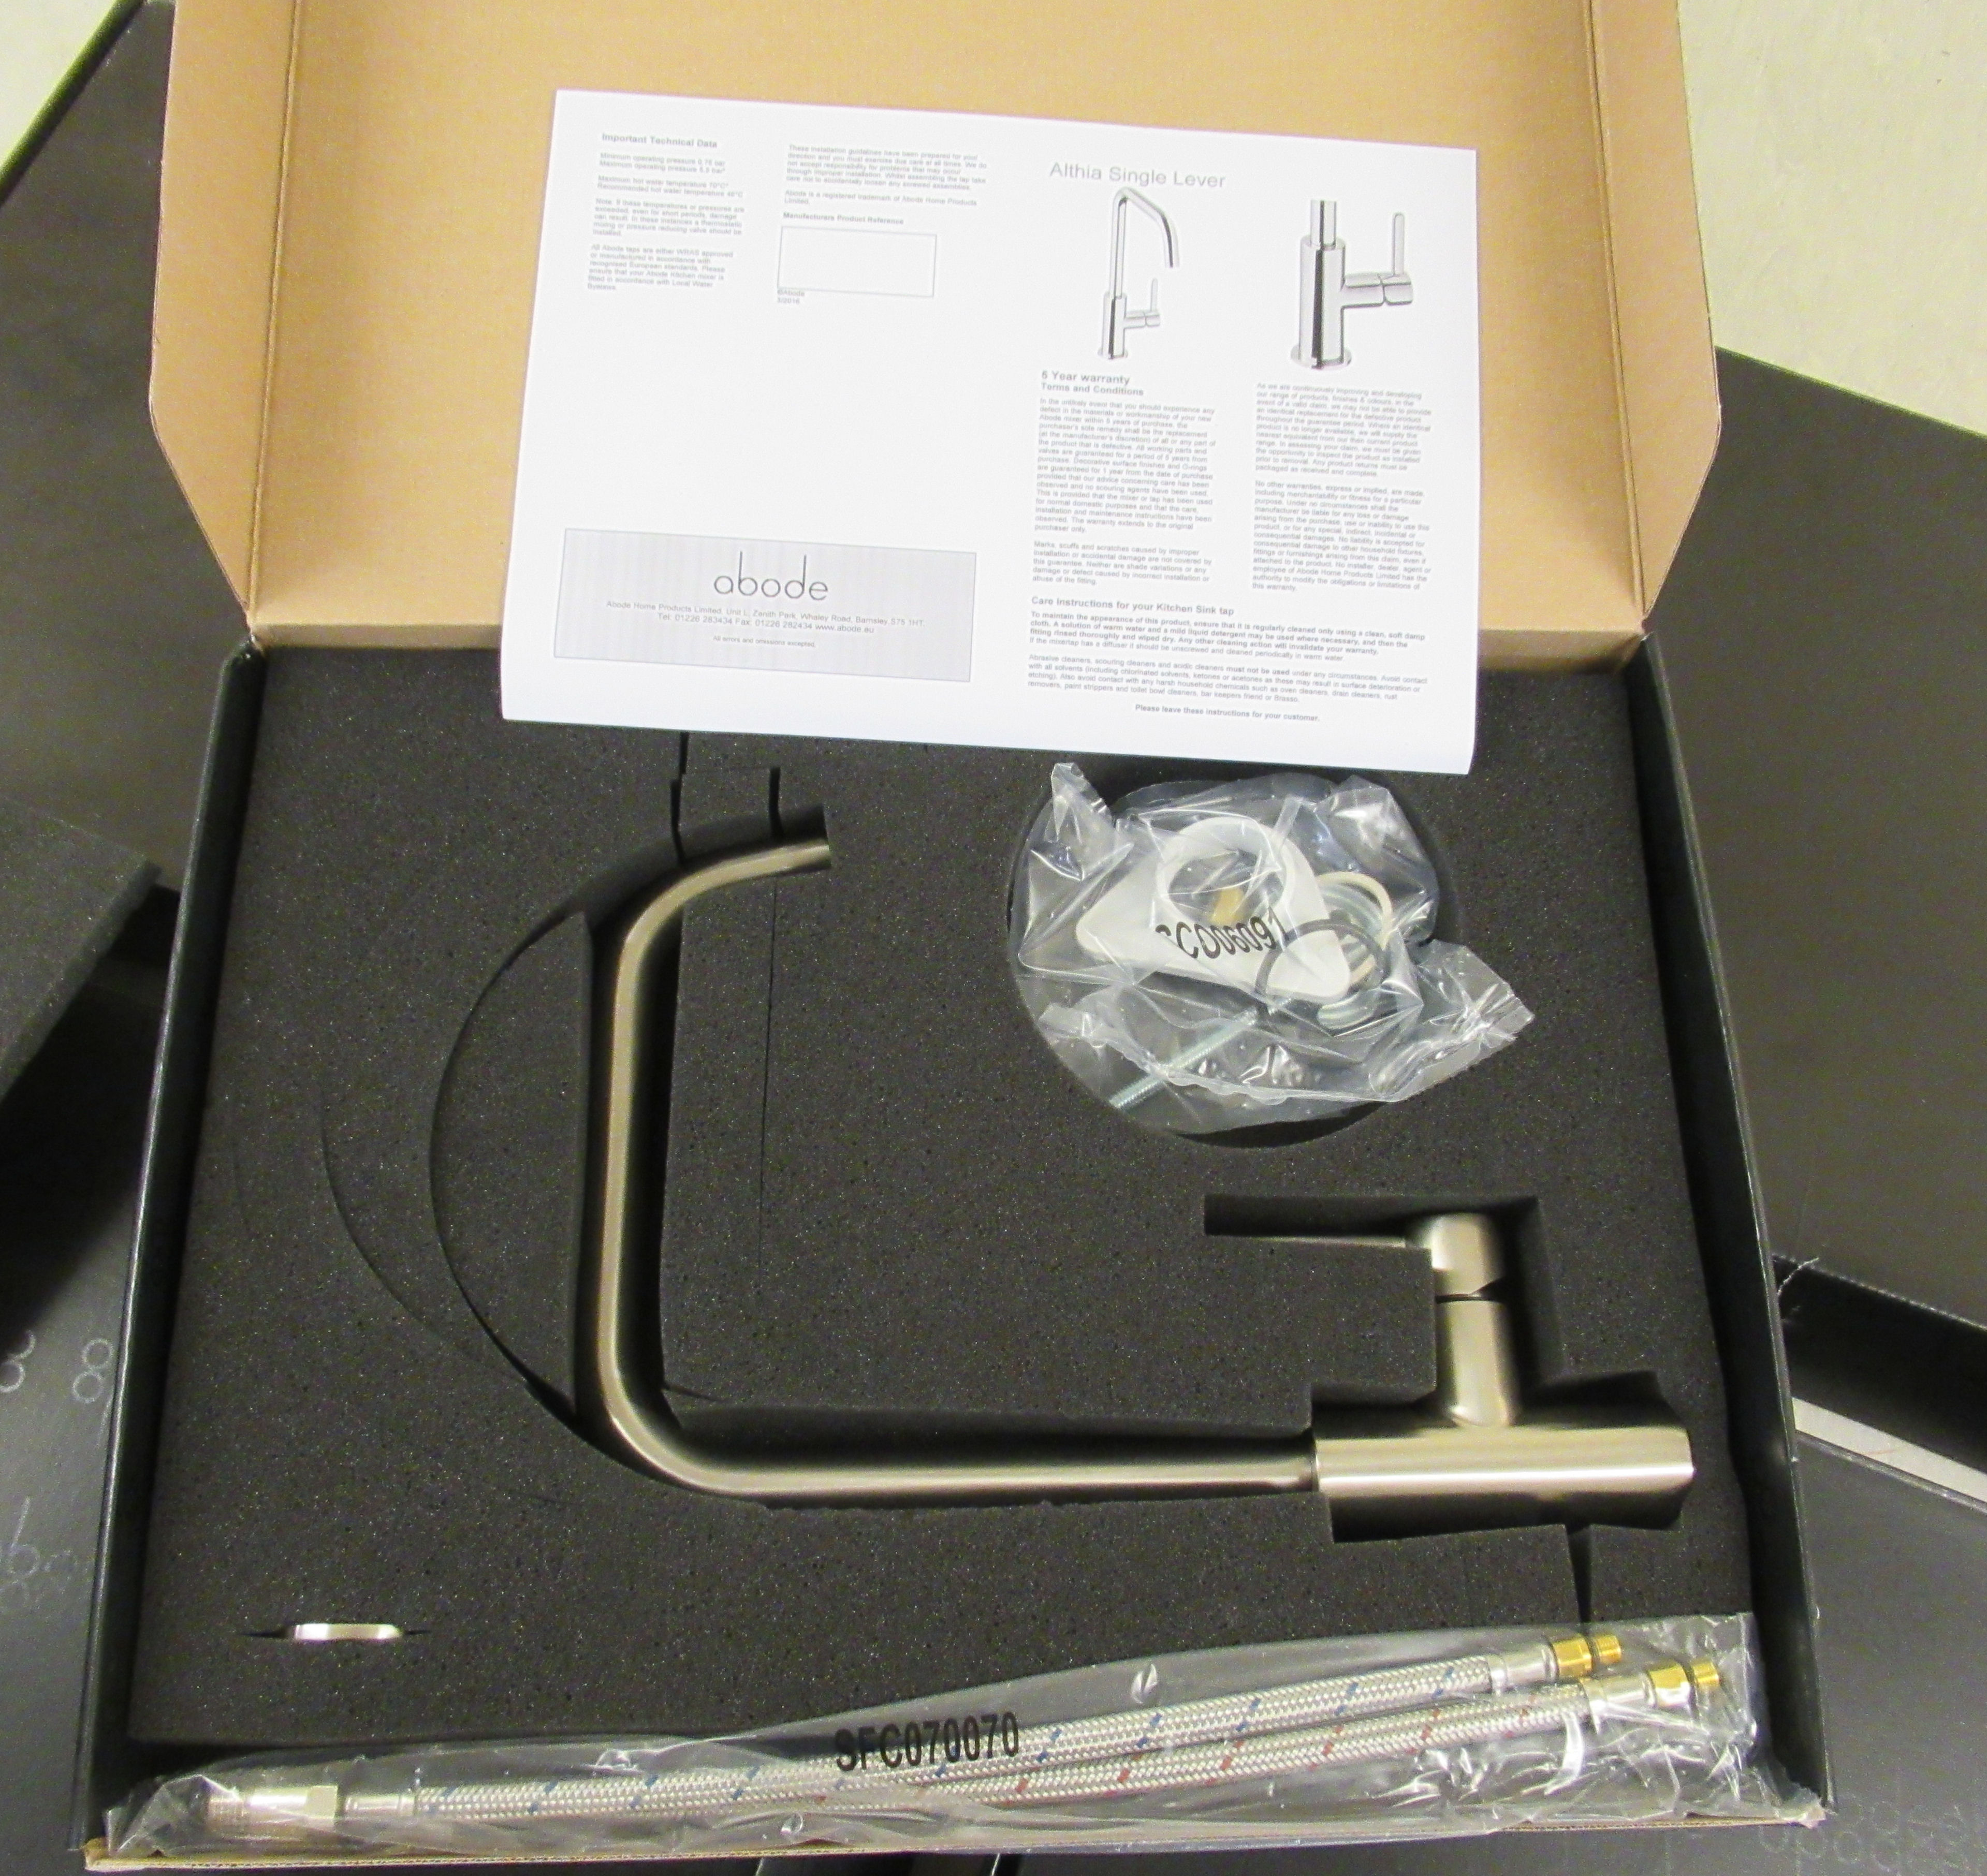 Five (unused) Althia stainless steel single level taps boxed CA